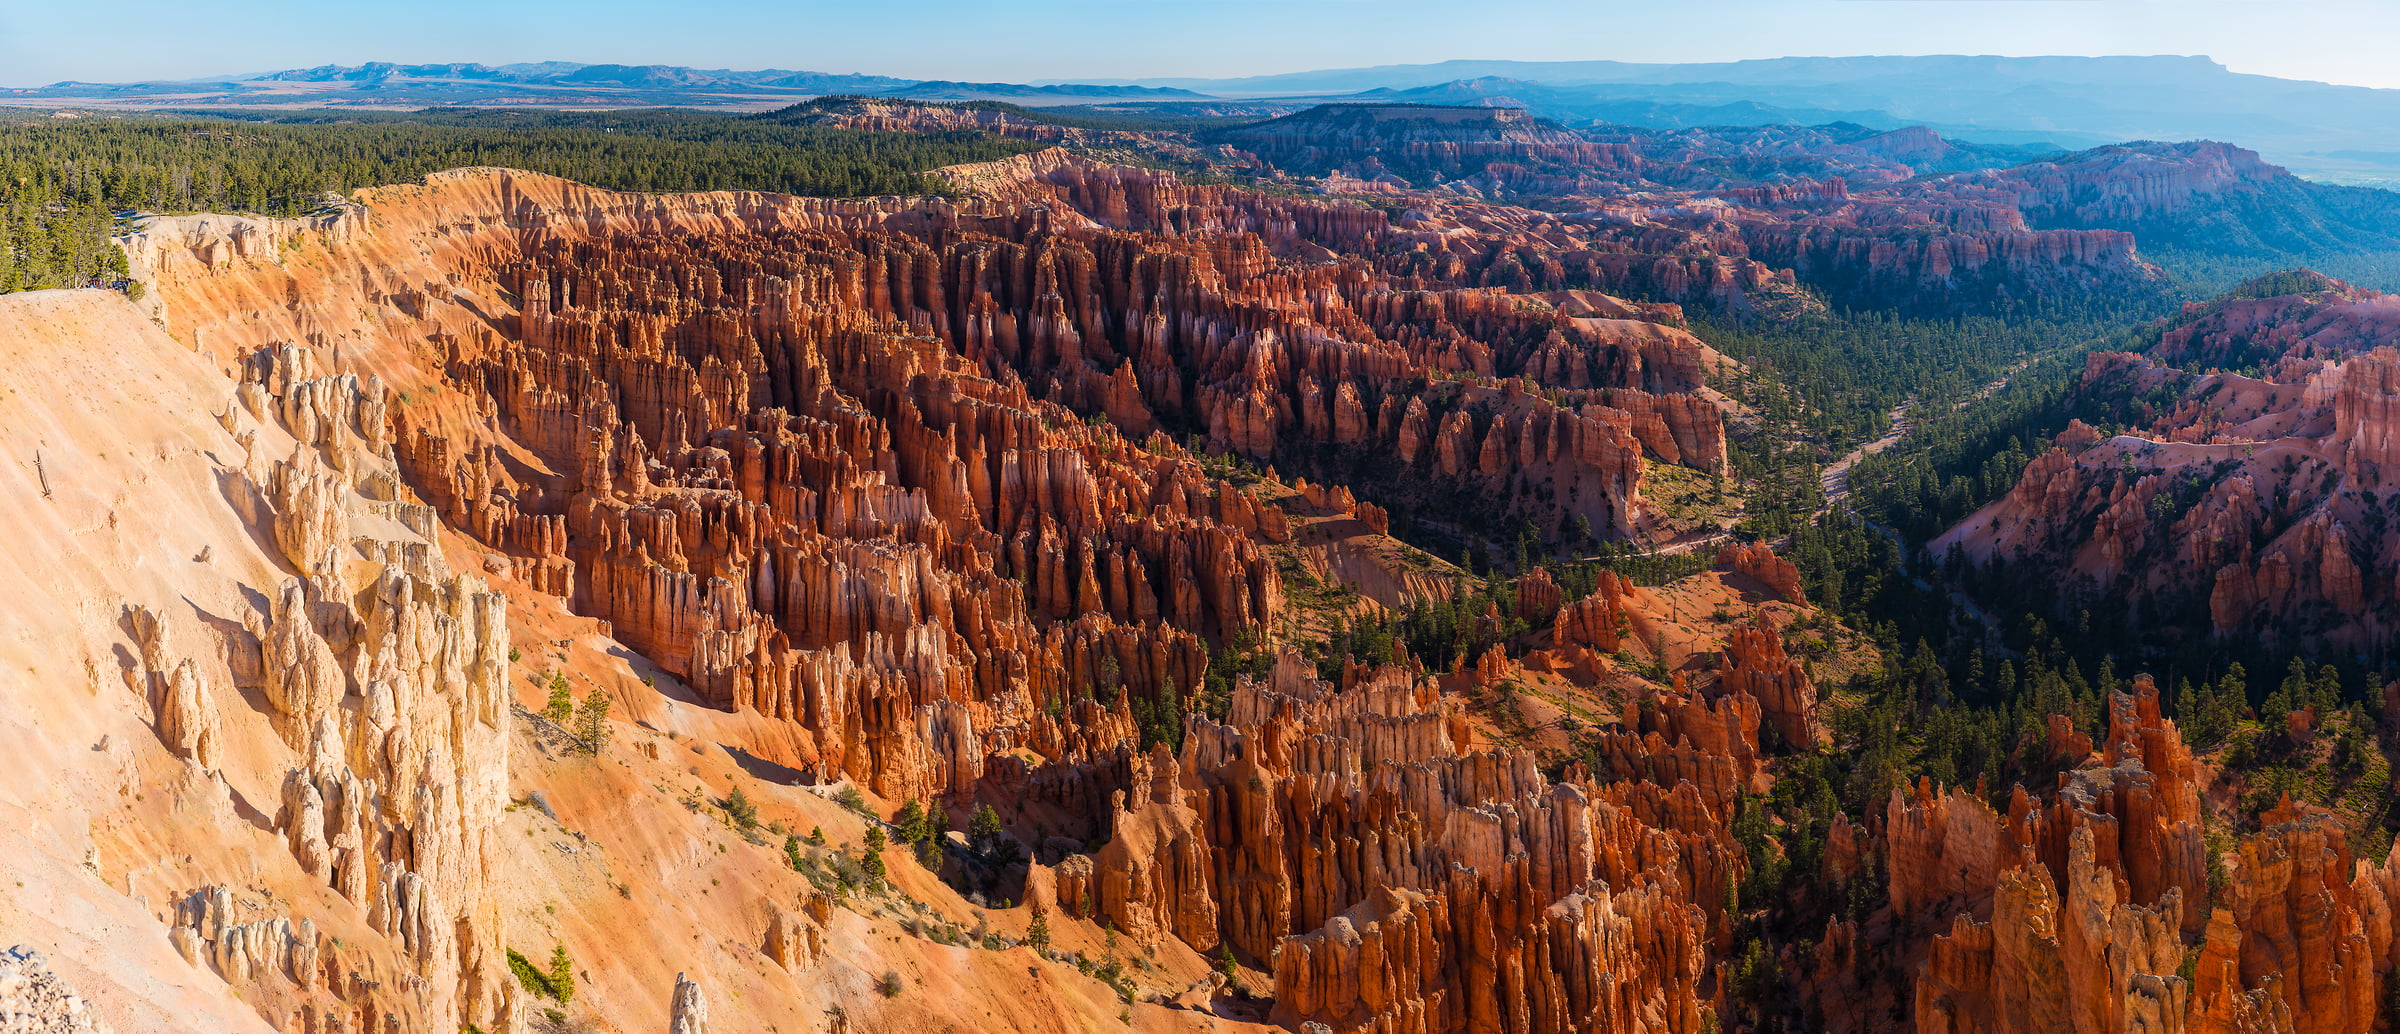 491 megapixels! A very high resolution, large-format VAST photo print of the American West; landscape panorama photograph created by Jim Tarpo in Bryce Canyon, Utah